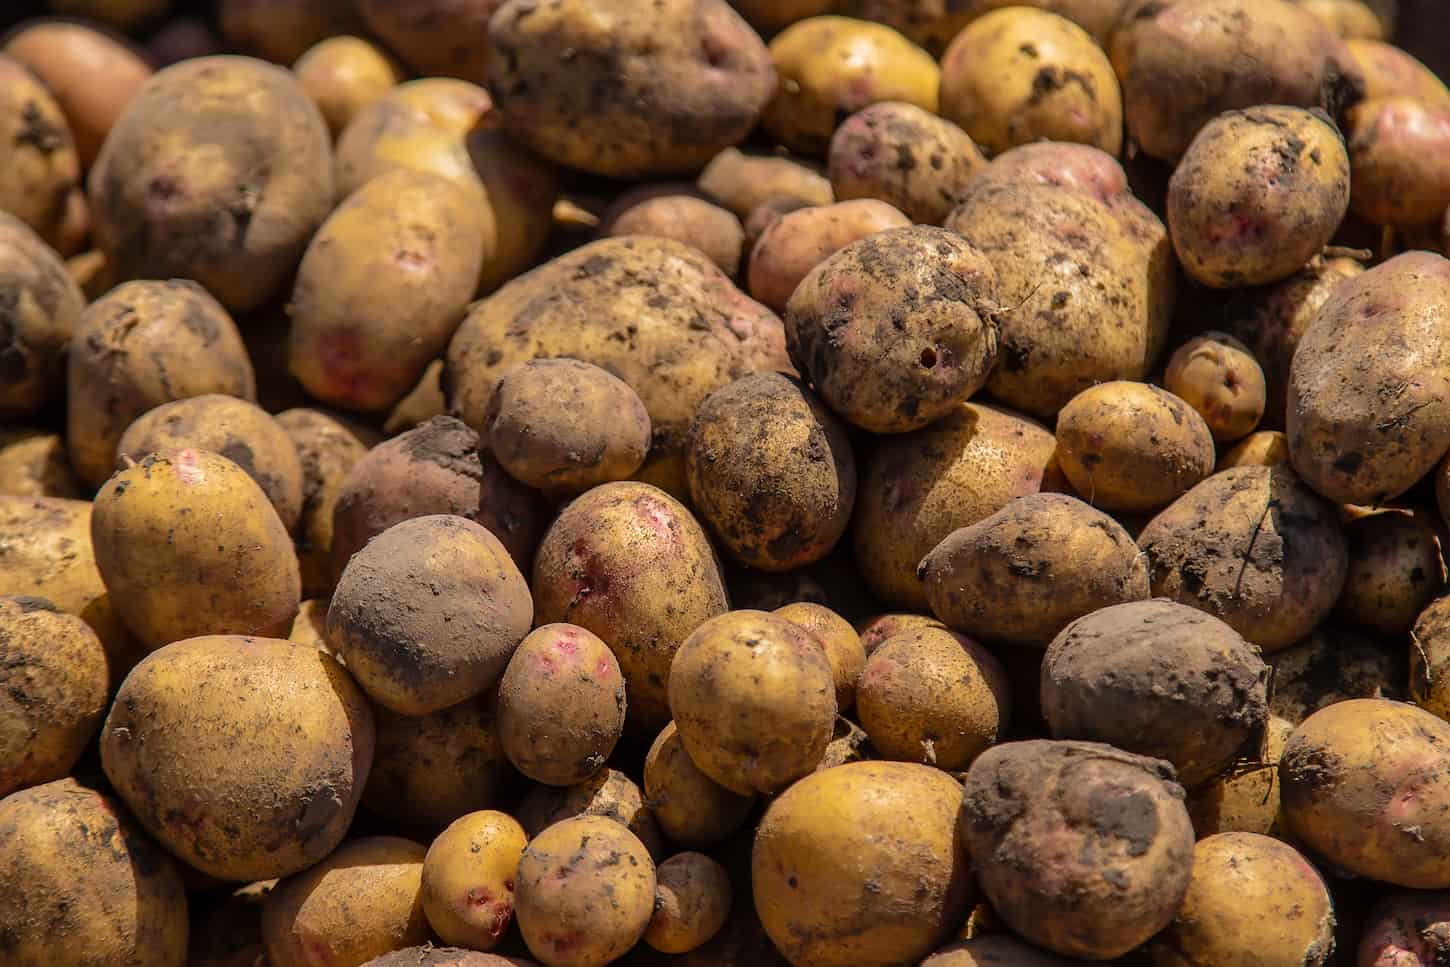 An image of Harvested potatoes in the garden.